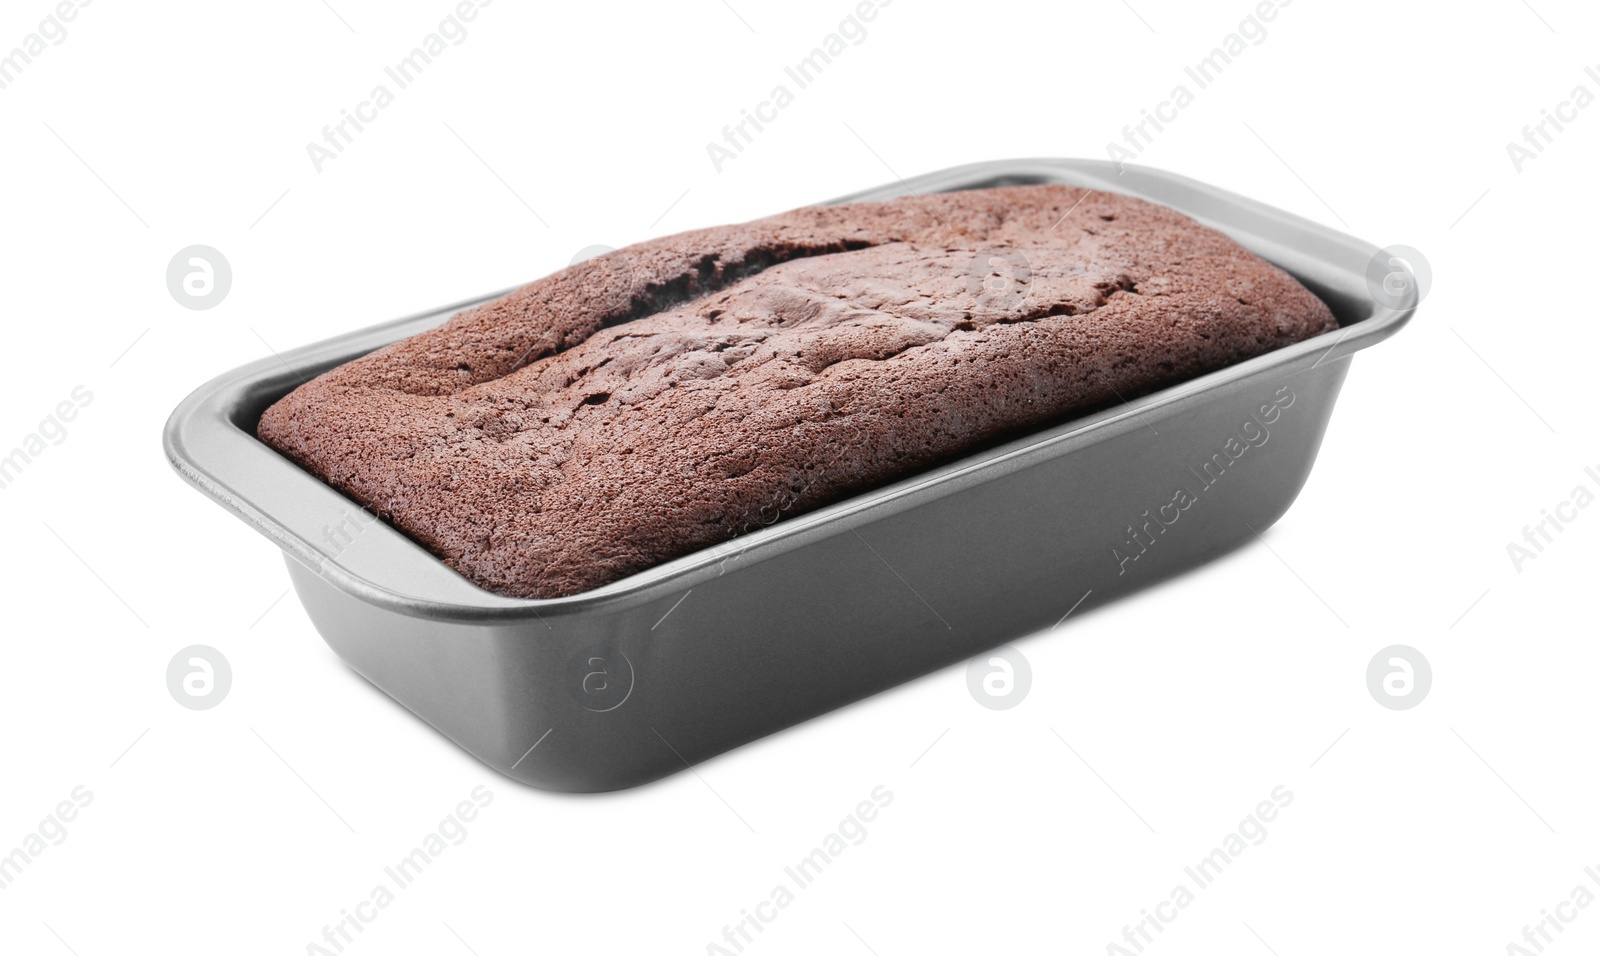 Photo of Delicious chocolate sponge cake in baking pan isolated on white